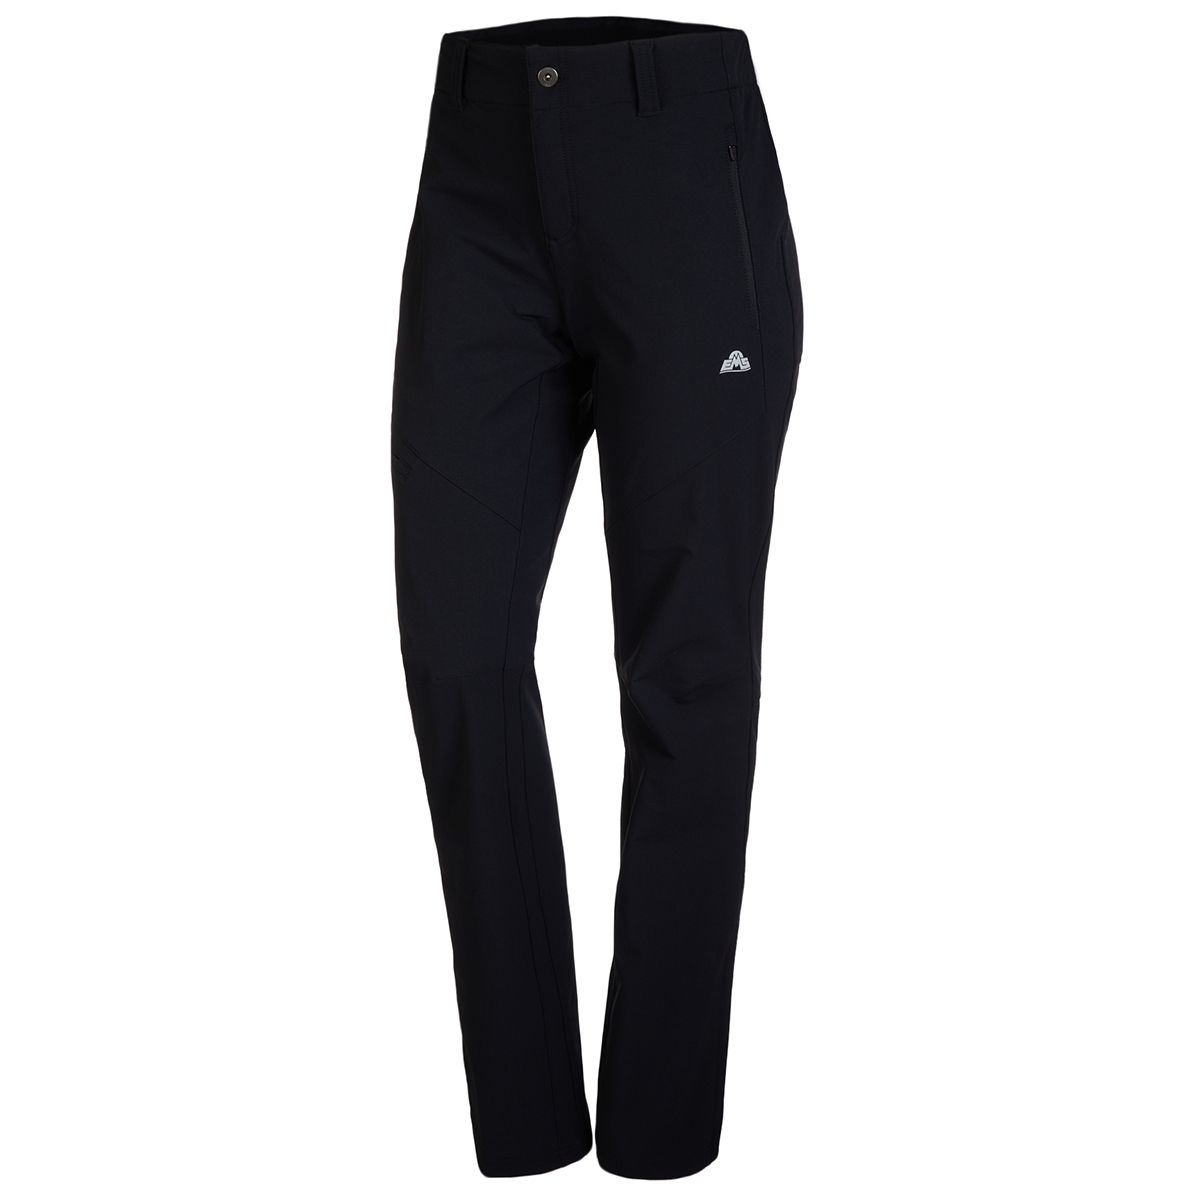 Women's Active Pants and Tights